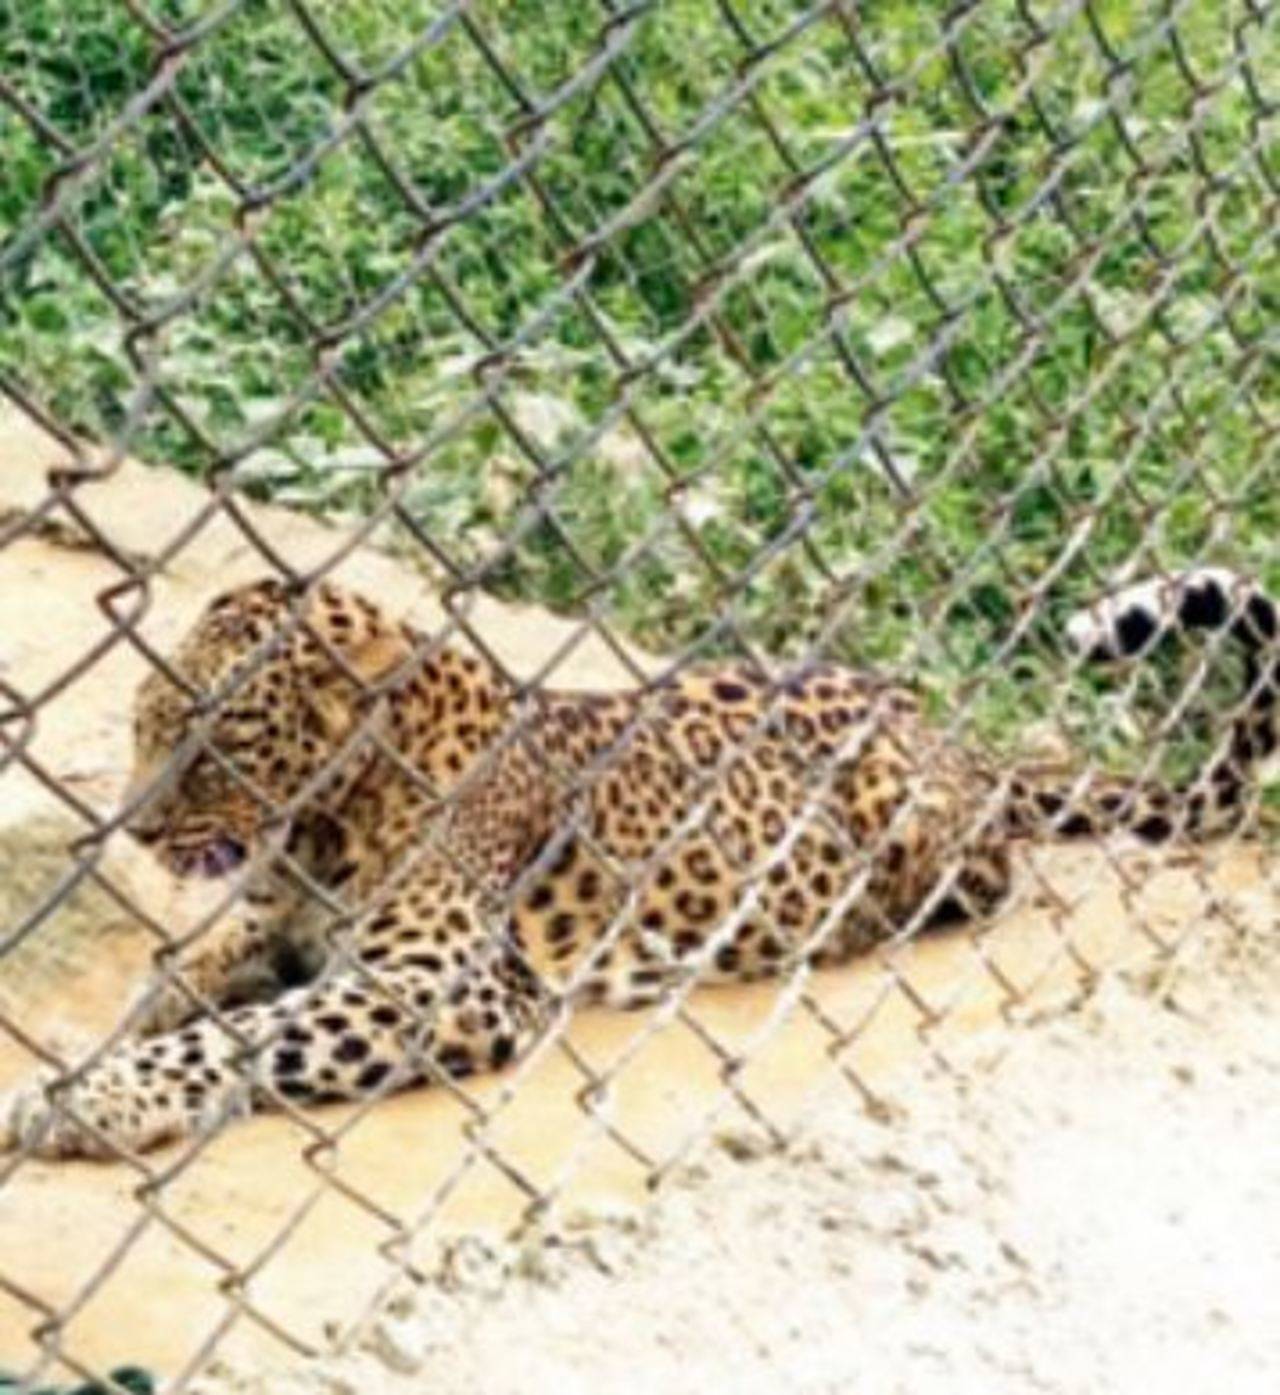 Leopards go missing from zoo, alert sounded | Chandigarh News - Times of  India